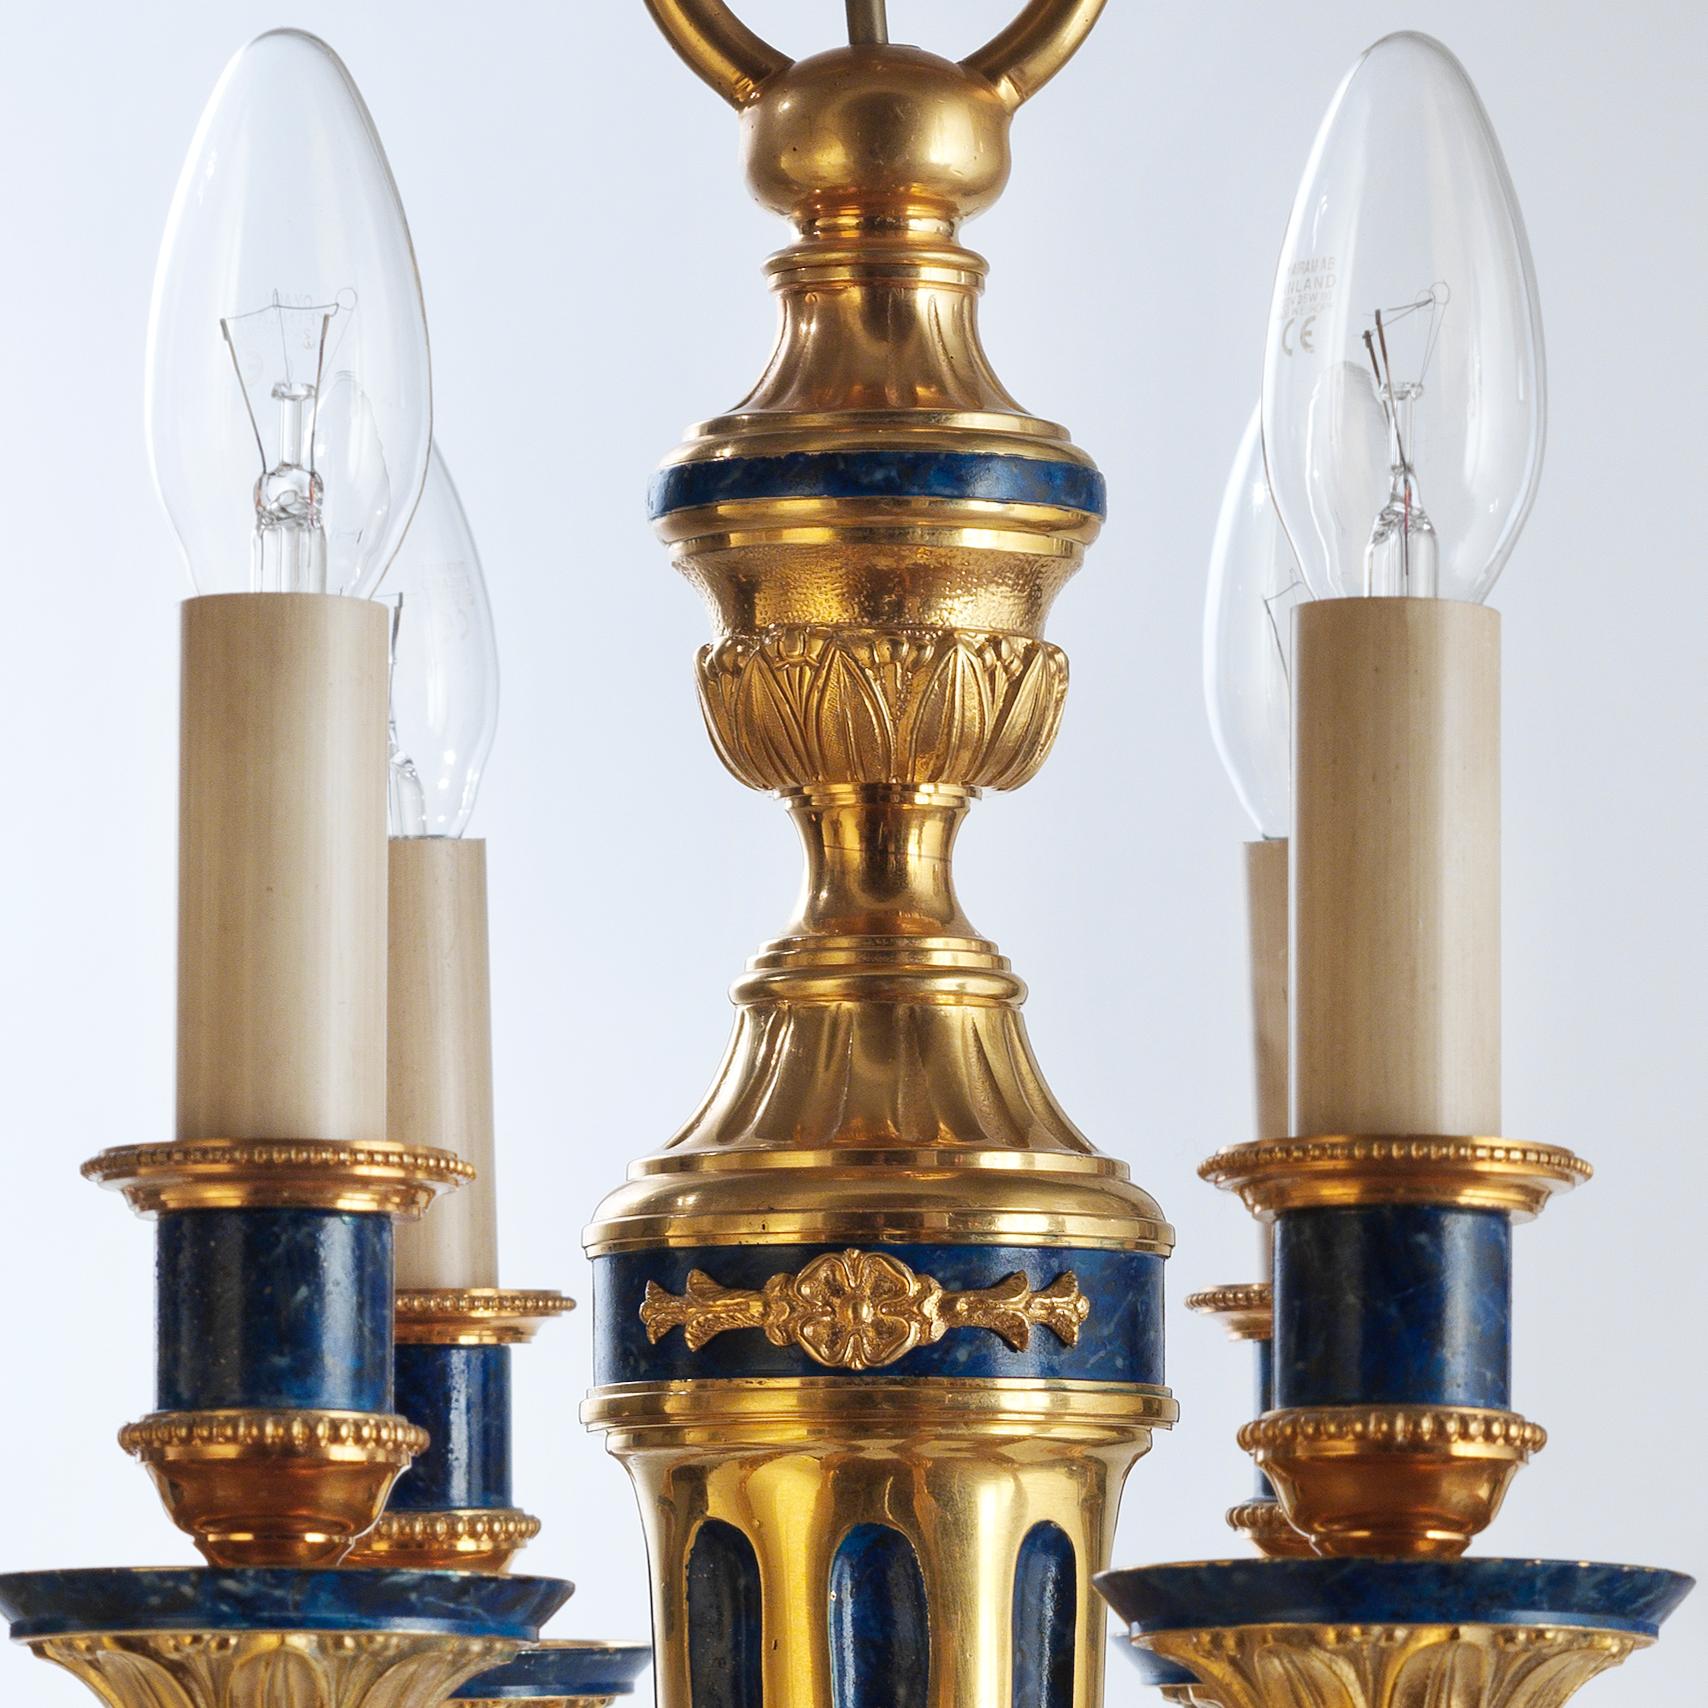 This Louis XVI style chandelier by Gherardo Degli Albizzi is derived from a typical wall sconce model of that period. It's possible to appreciate the handcrafted work of gilt bronze decorations such as vegetal and fruit motifs all-over. At the